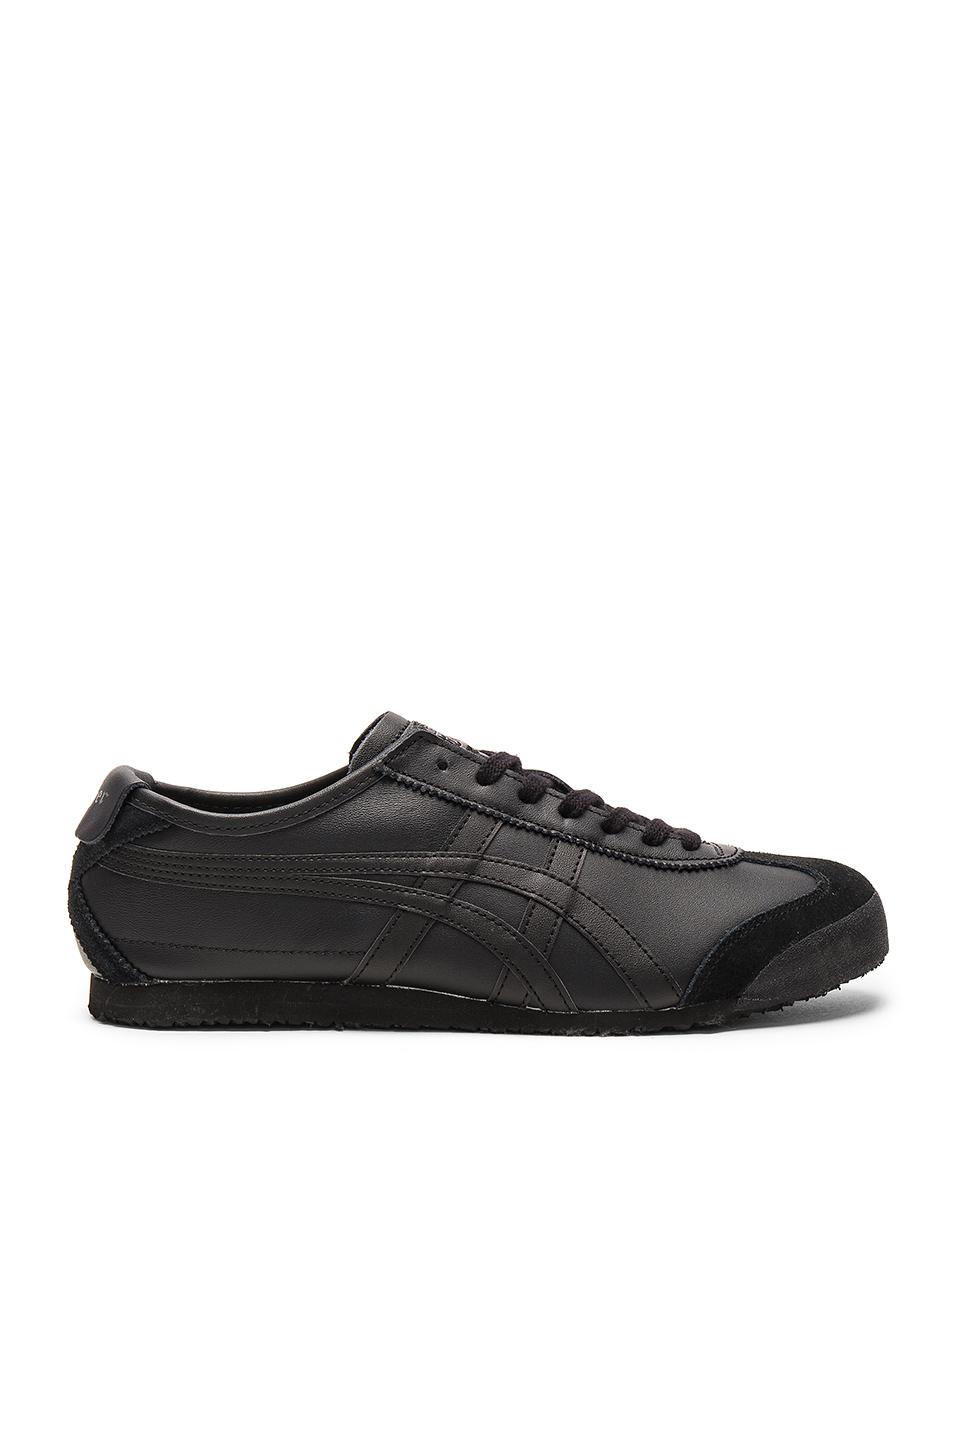 Onitsuka Tiger Leather Mexico 66 Sneakers in Black & Black (Black) for ...